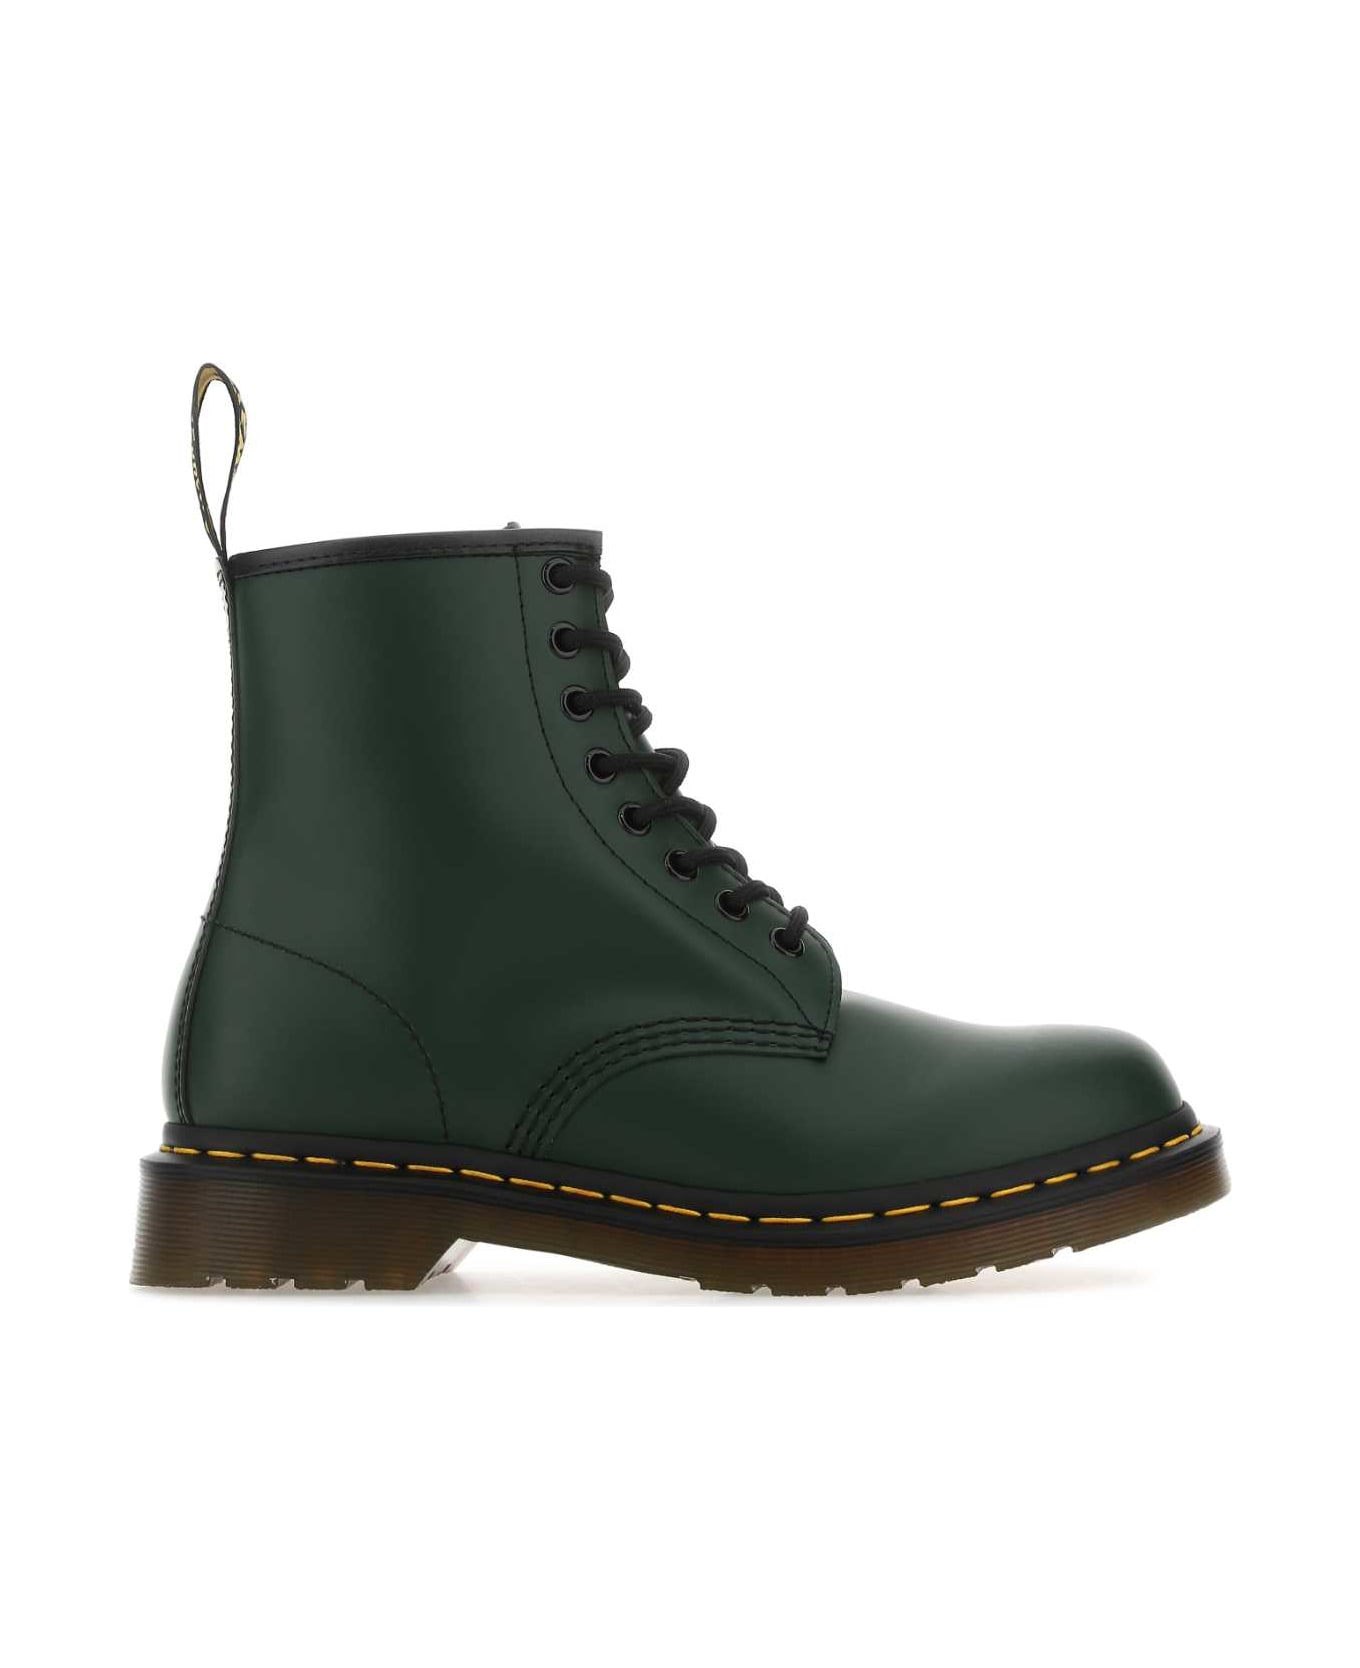 Dr. Martens Bottle Green Leather 1460 Ankle Boots - GreenSmooth